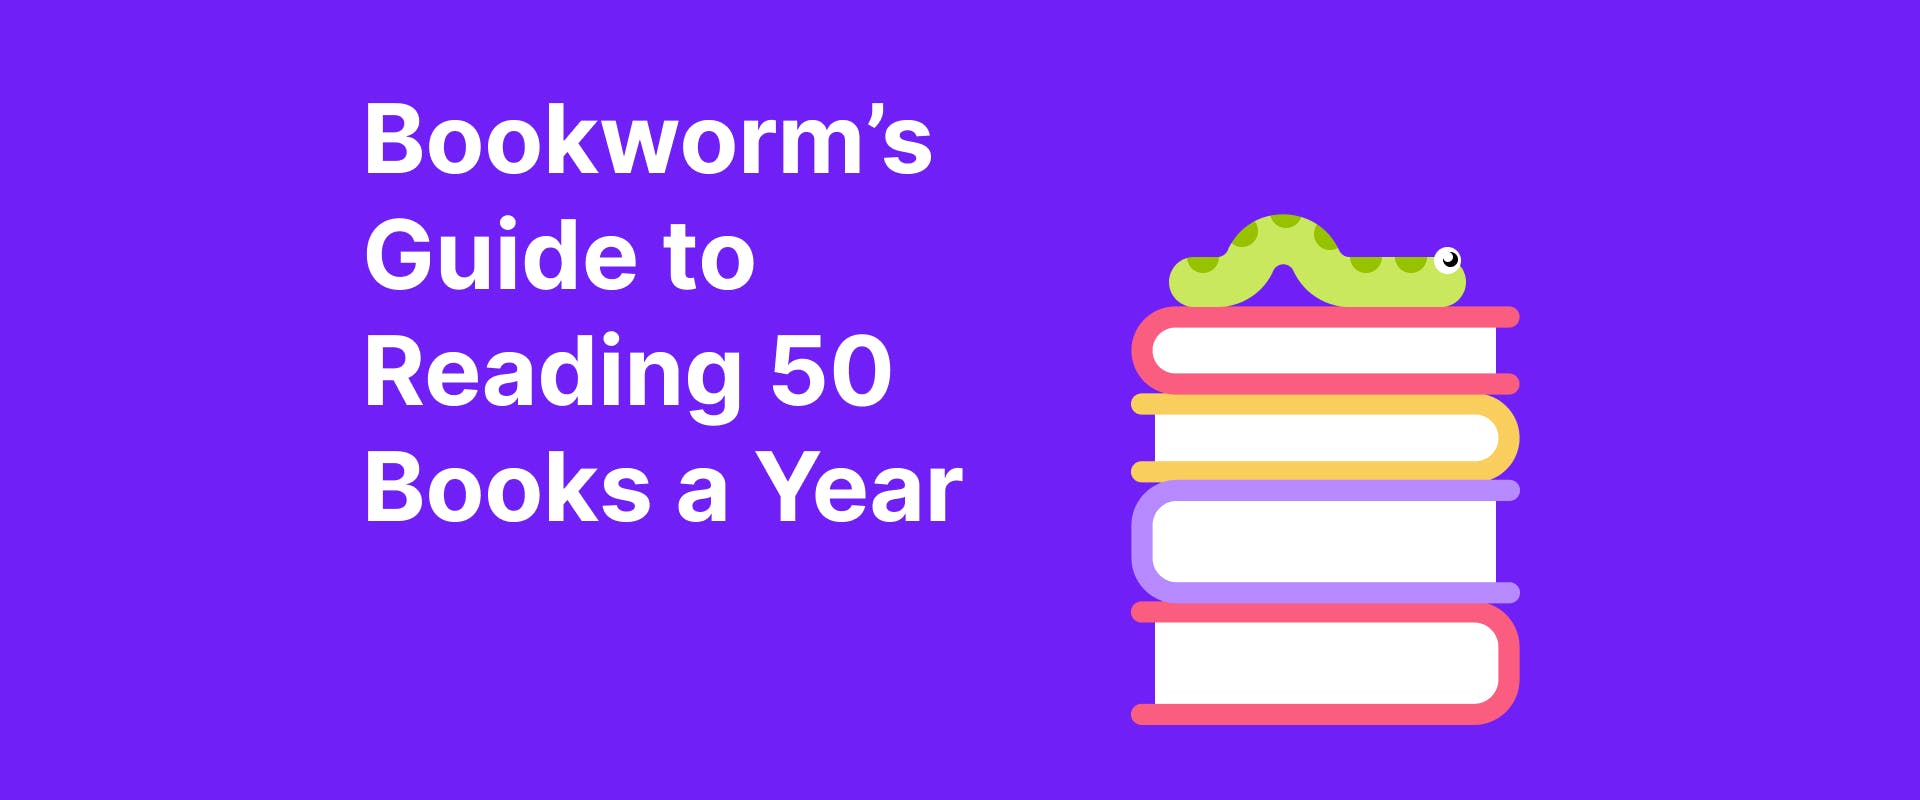 Bookworm’s Guide to Reading 50 Books a Year